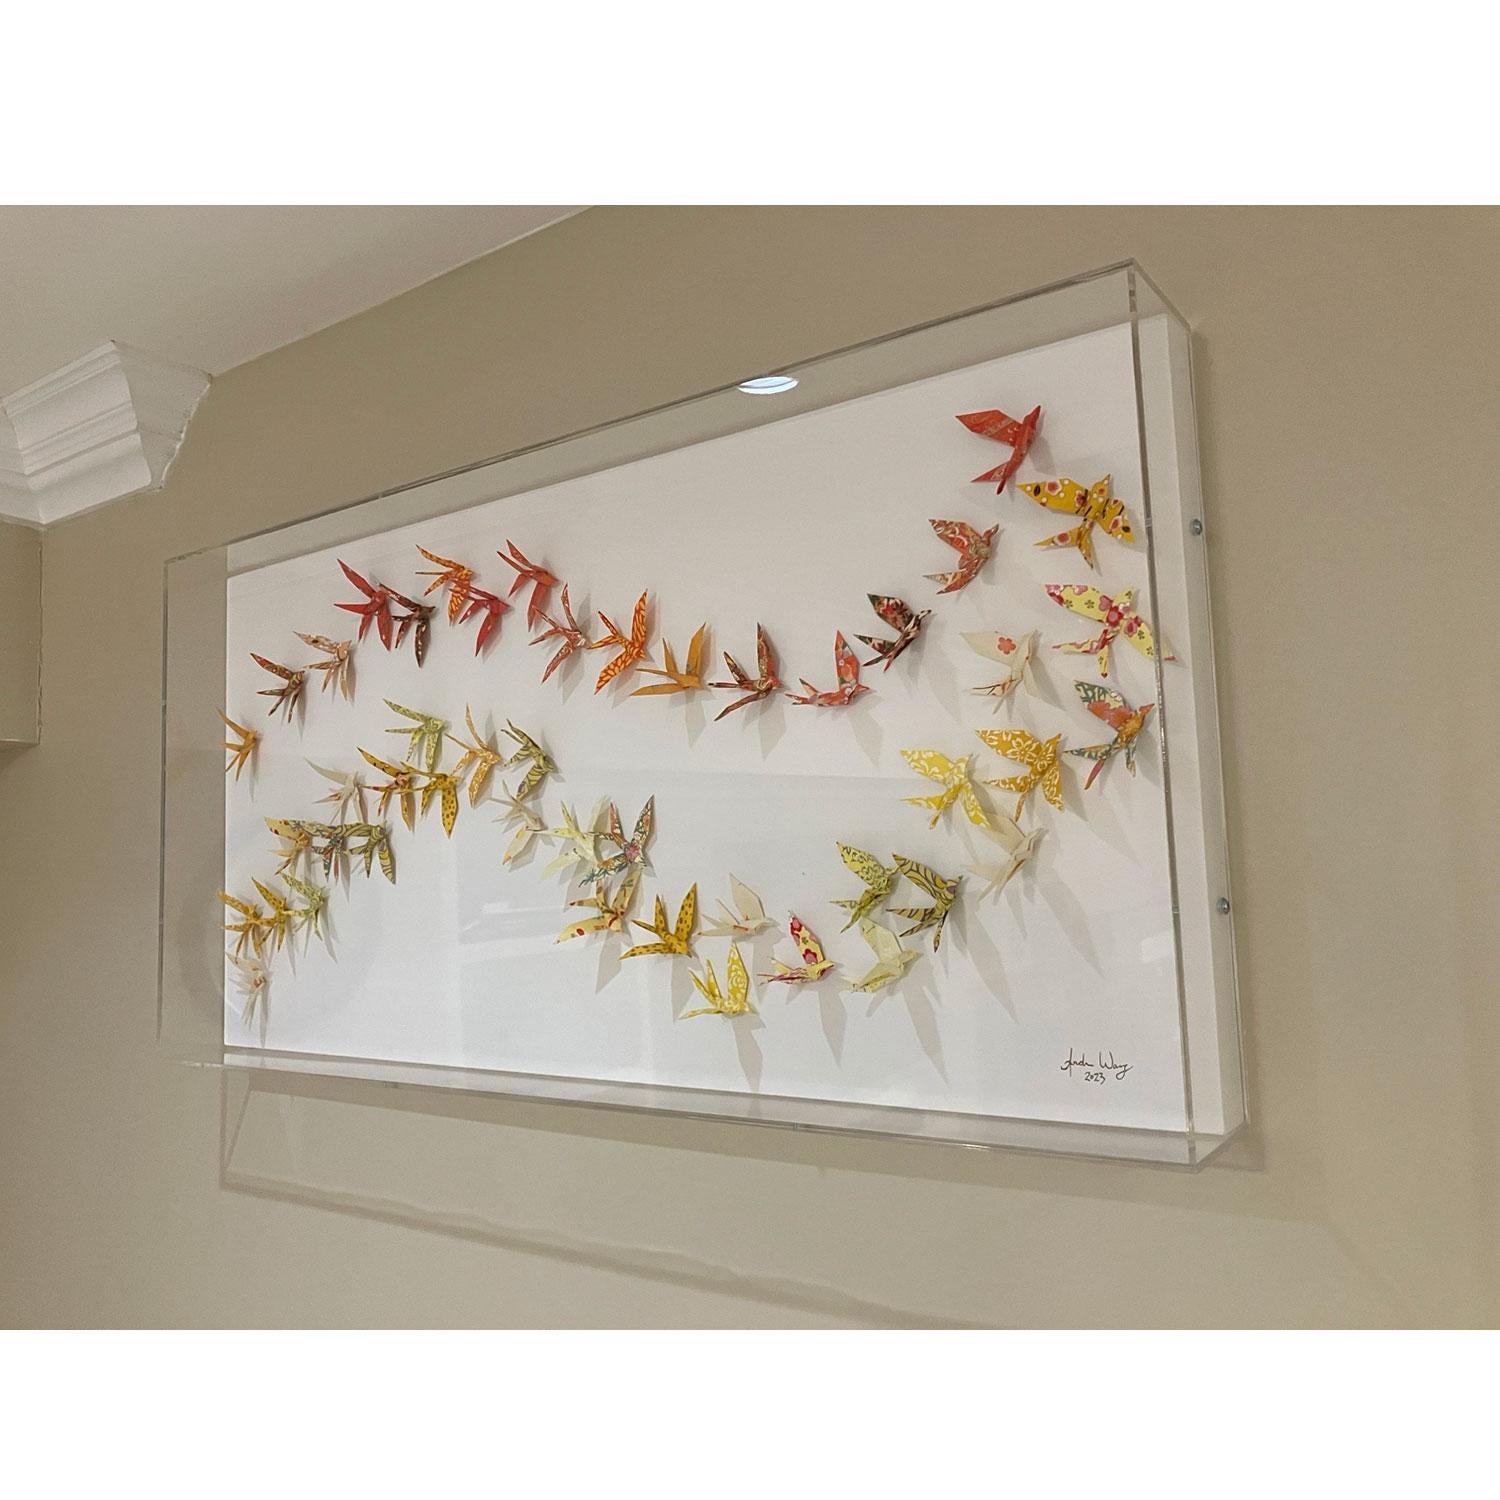 This unique origami piece features hundreds of hand folded chiyogami paper birds mounted precisely on wood panel and framed in an elegant acrylic shadow box.

Andrew Wang unearths great journeys through origami assemblage, influenced by his